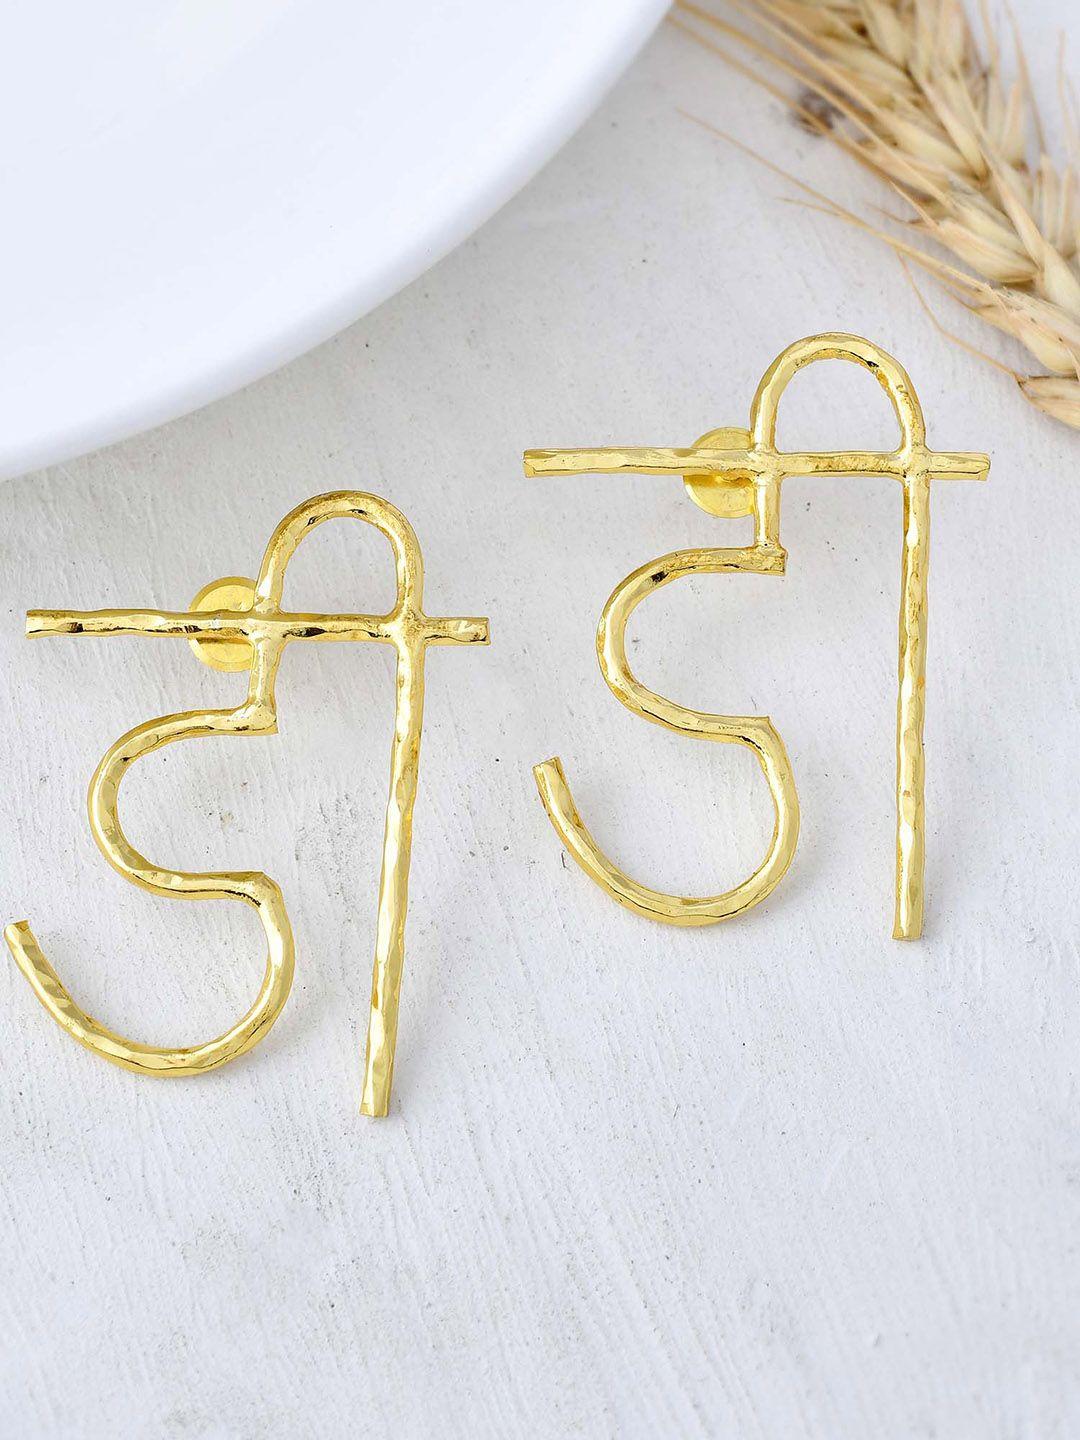 ZURII Gold-Plated Classic Drop Earrings